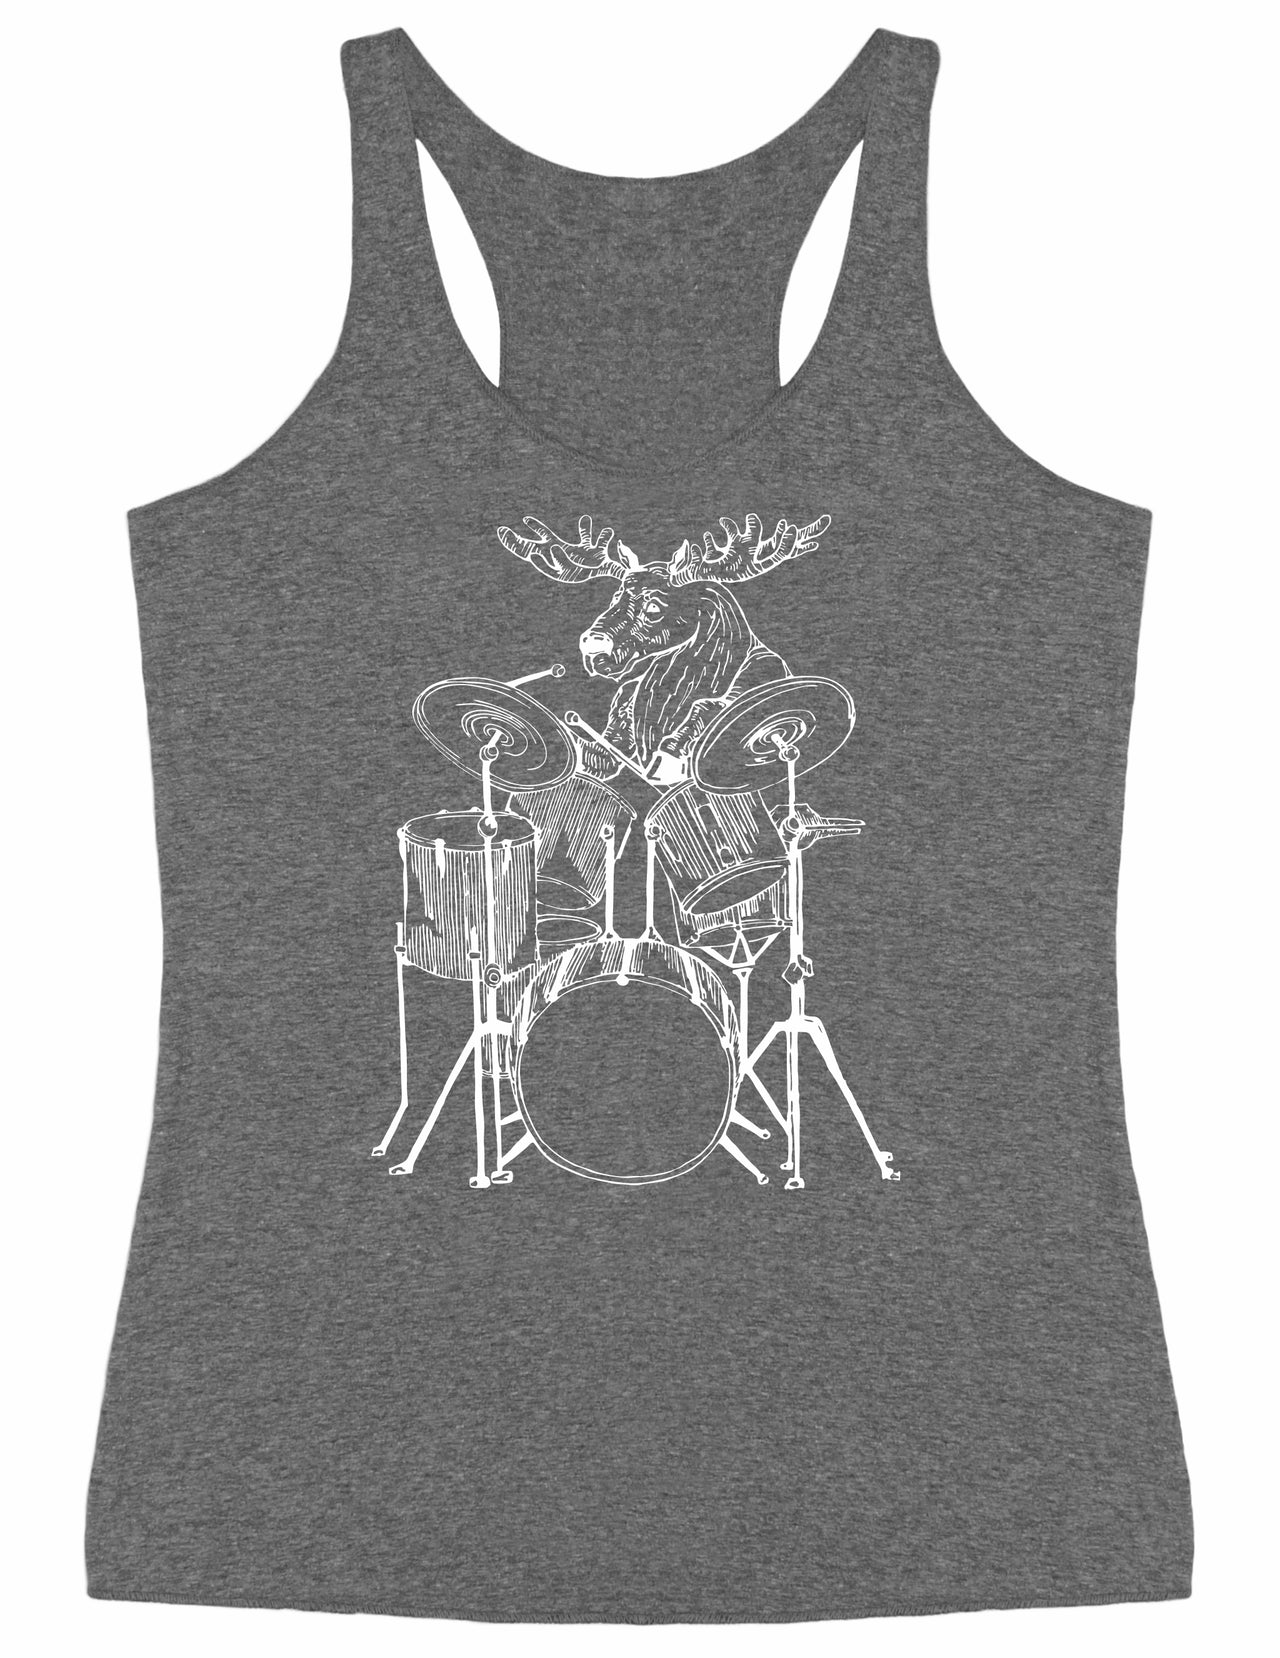 SEEMBO Moose Playing Drums Funny Drummer Musician Band Women Tri-Blend Tank Top